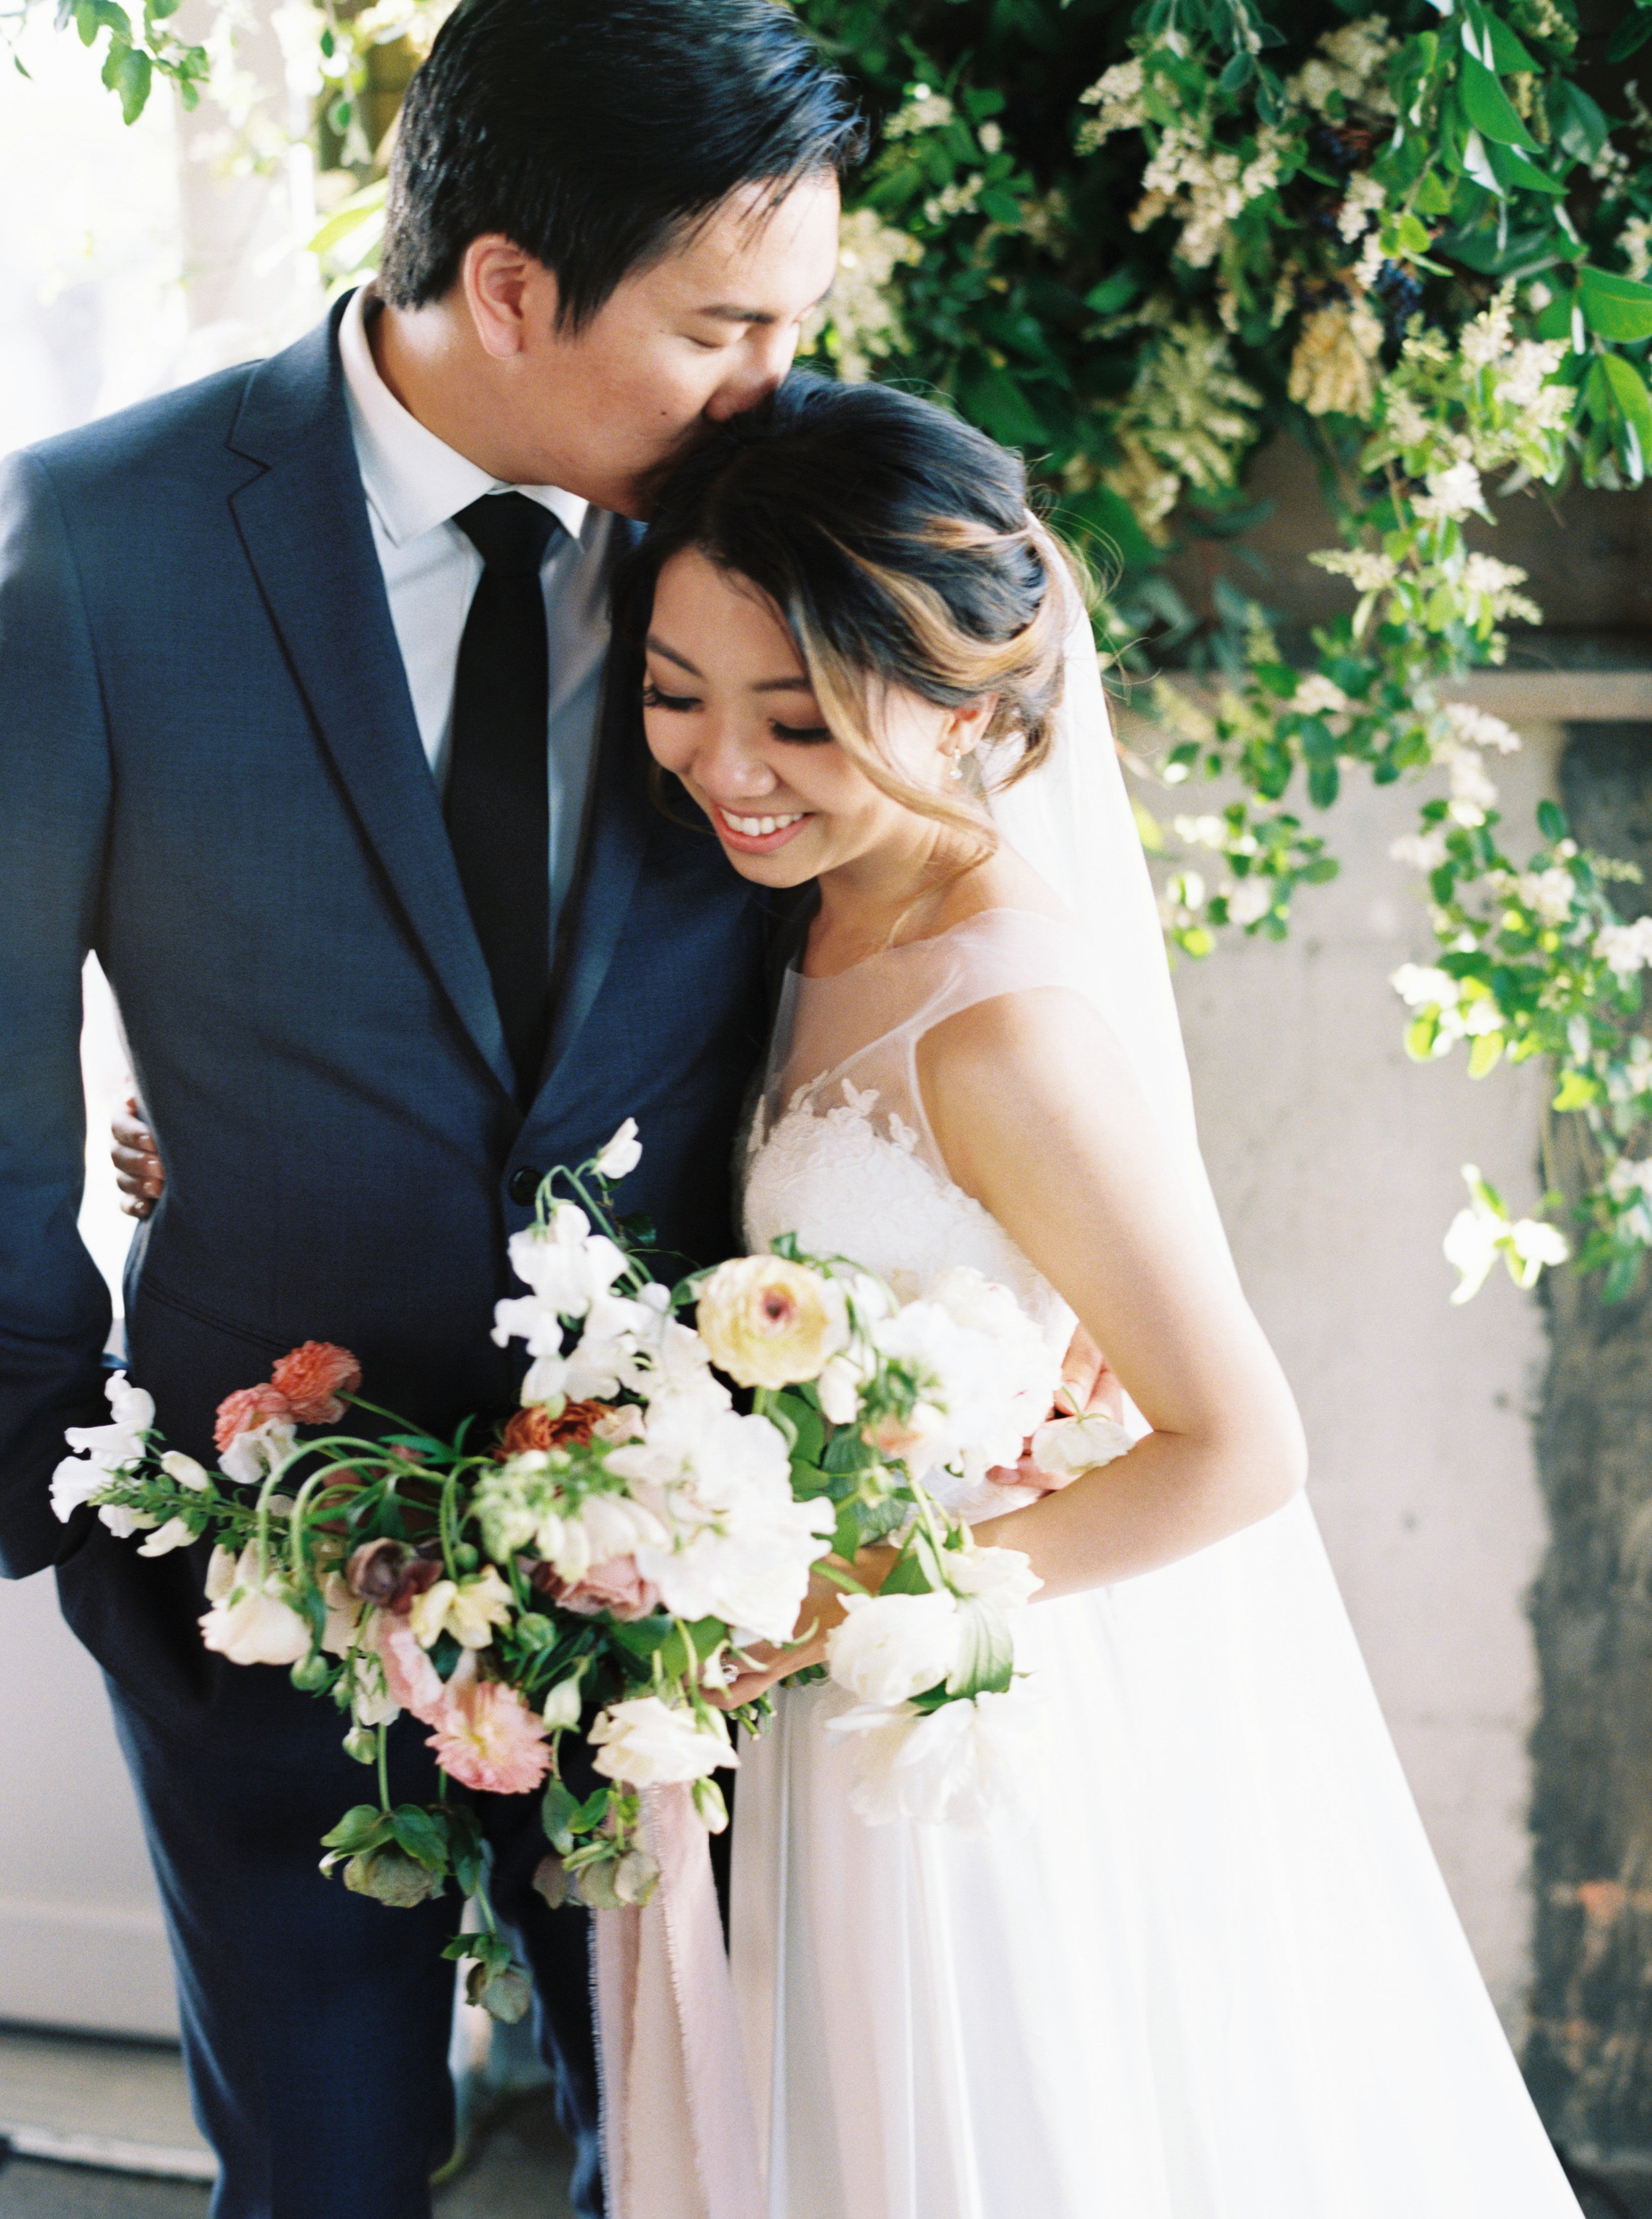 How I Planned My Wedding: My Favorite Photos from Our Wedding — Natalie ...